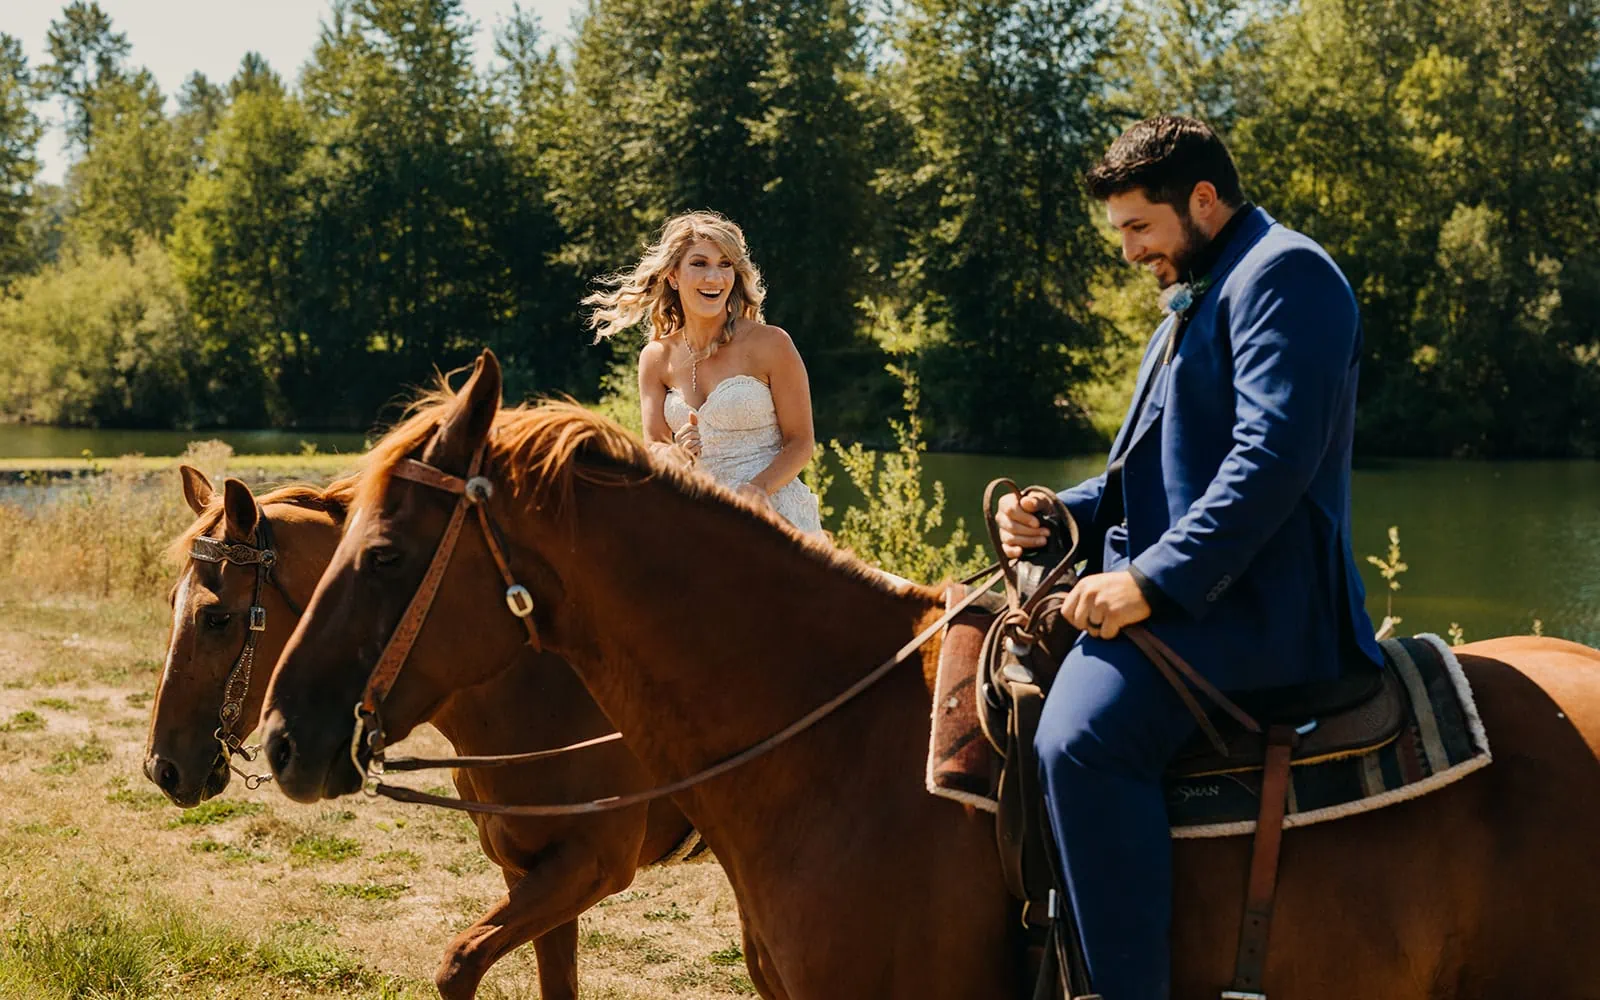 A bride smiles at her groom as they ride horse back together on a summer day.